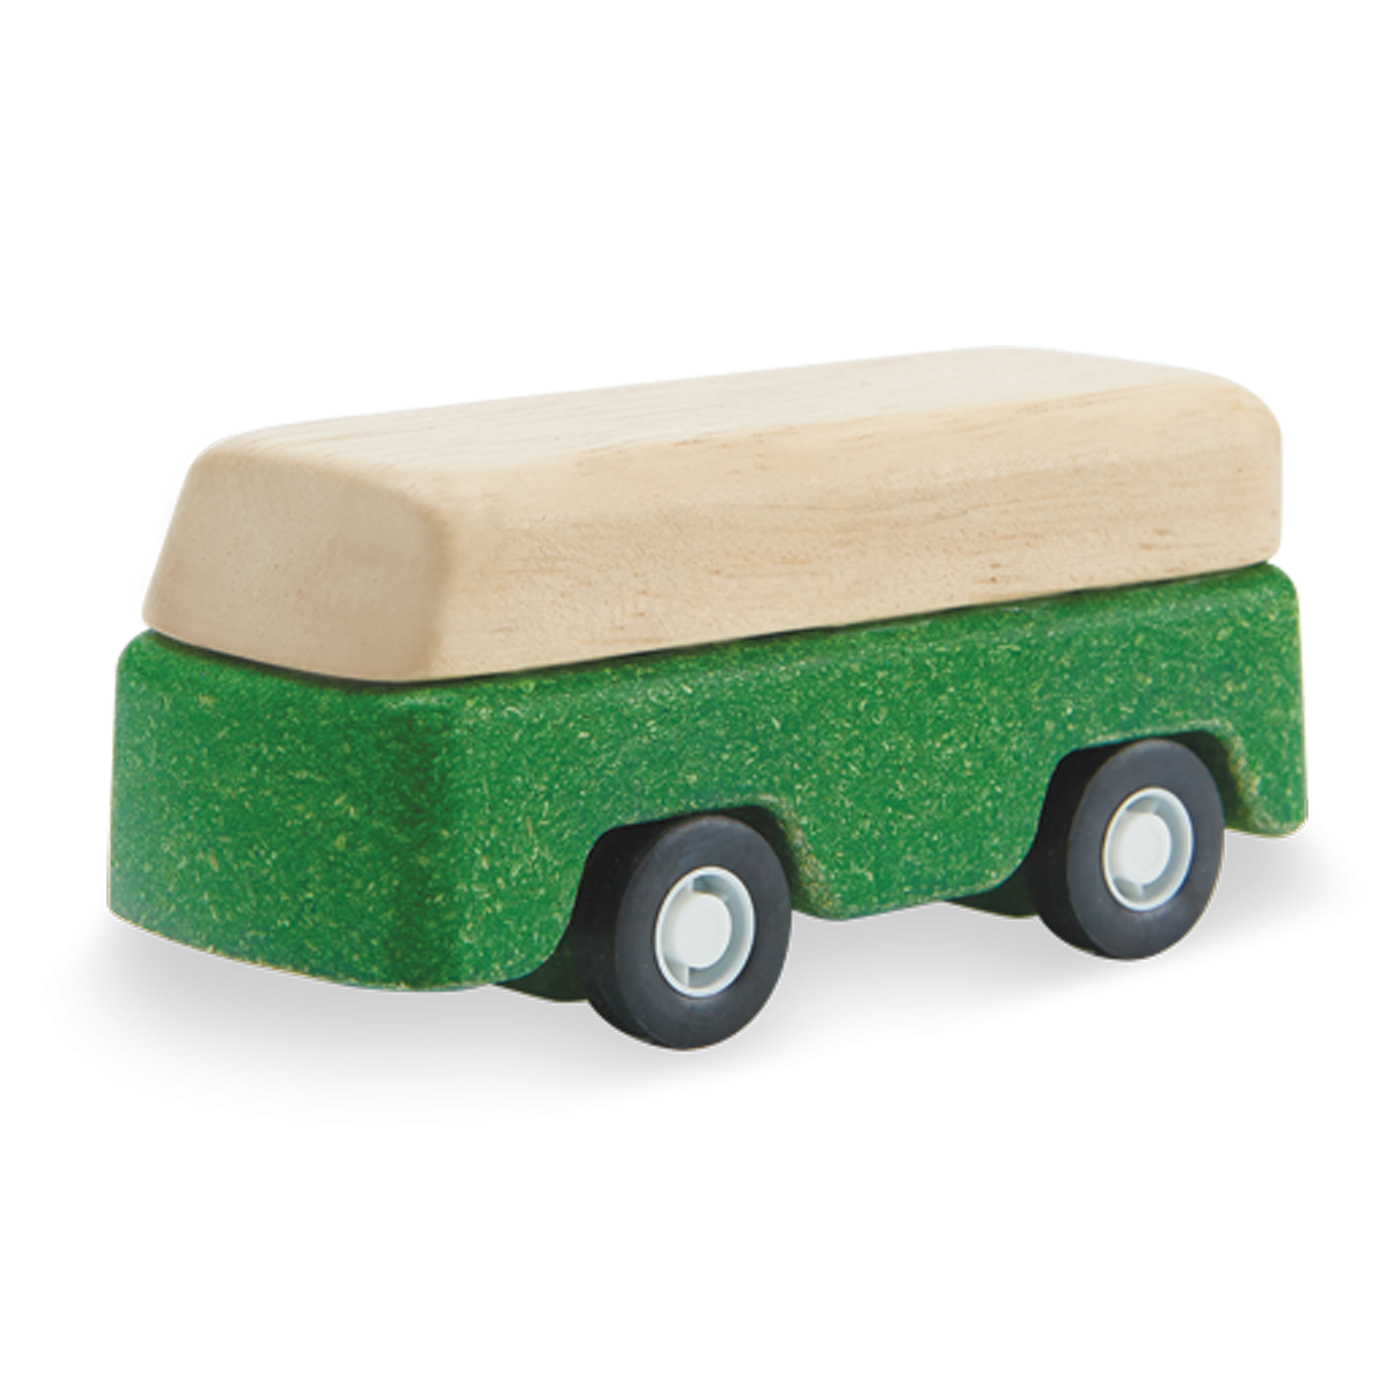 Green Bus by Plan Toys